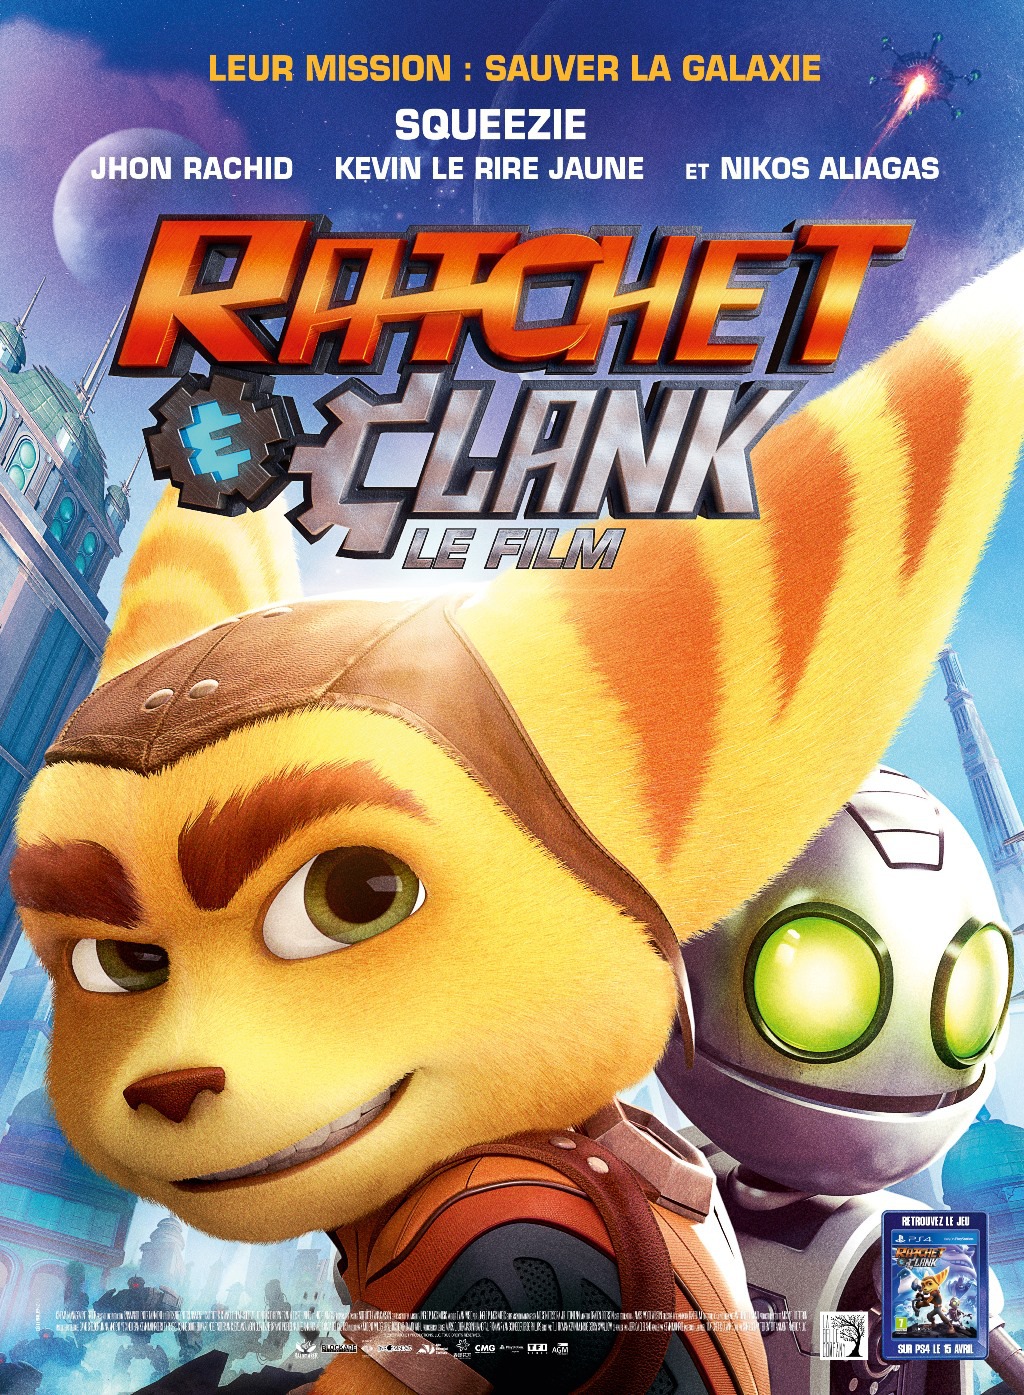 Extra Large Movie Poster Image for Ratchet and Clank (#3 of 5)